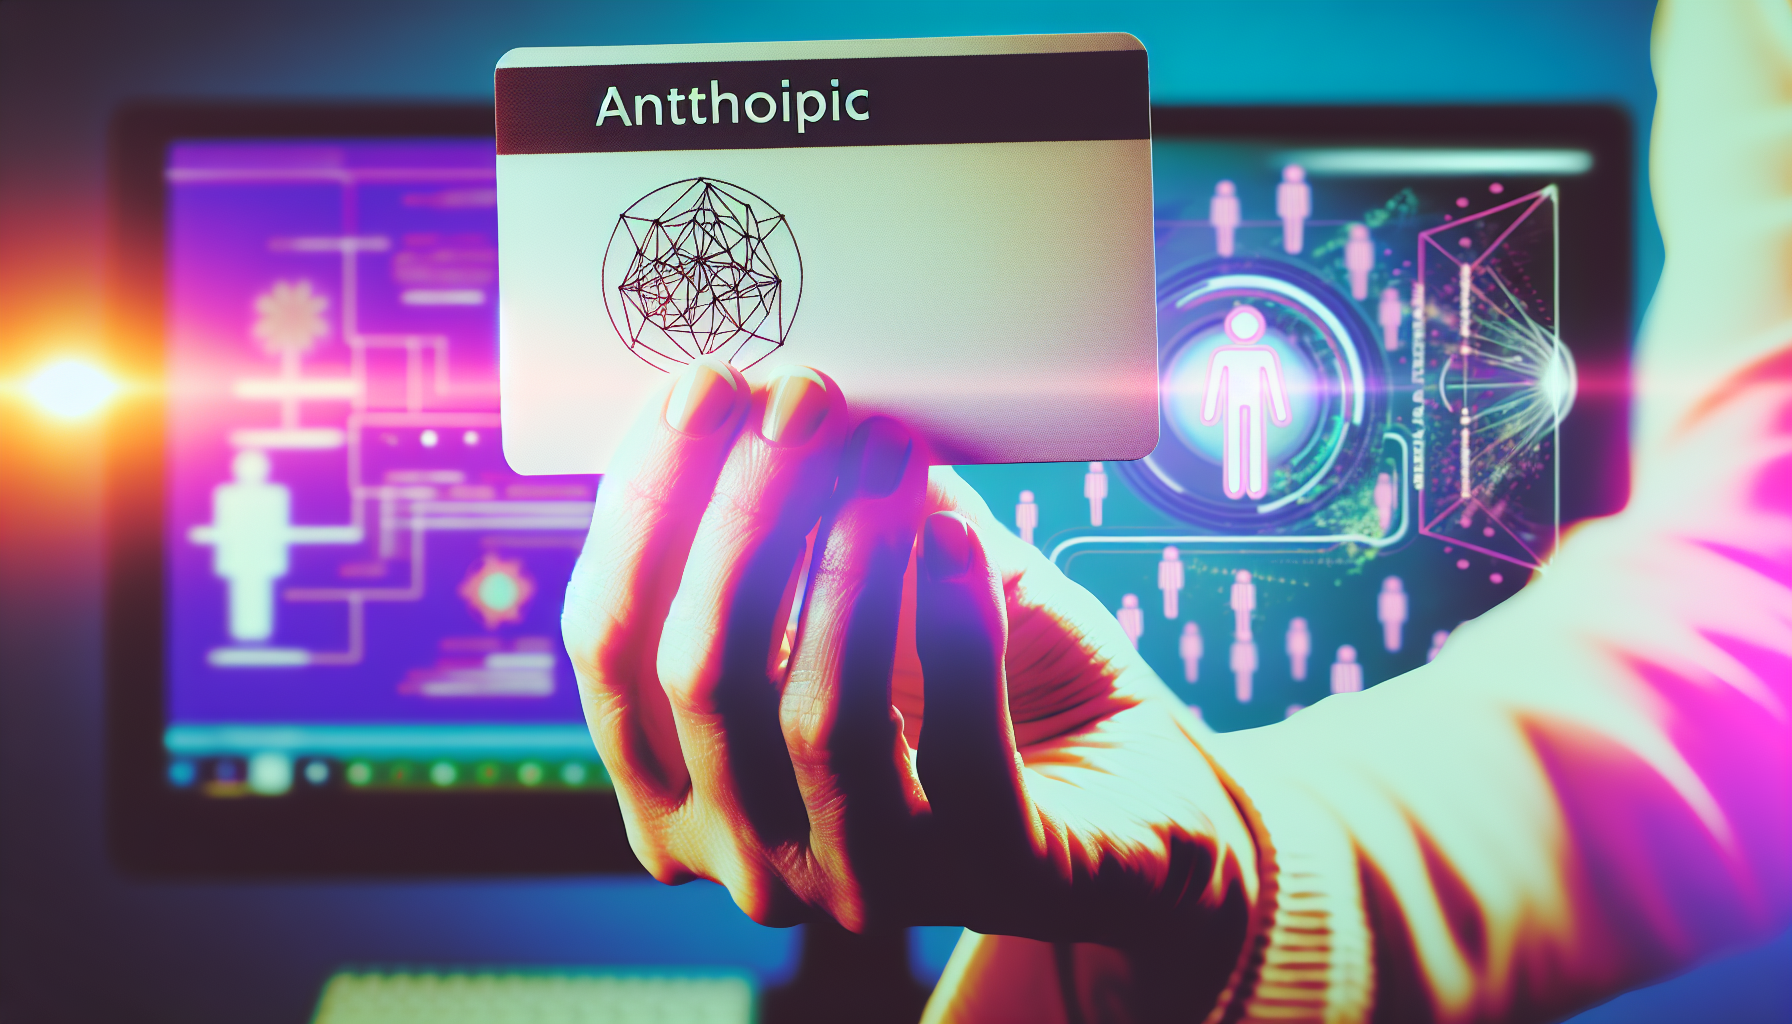 Anthropic Plans to Upgrade AI Chatbot Claude with Image Recognition Features